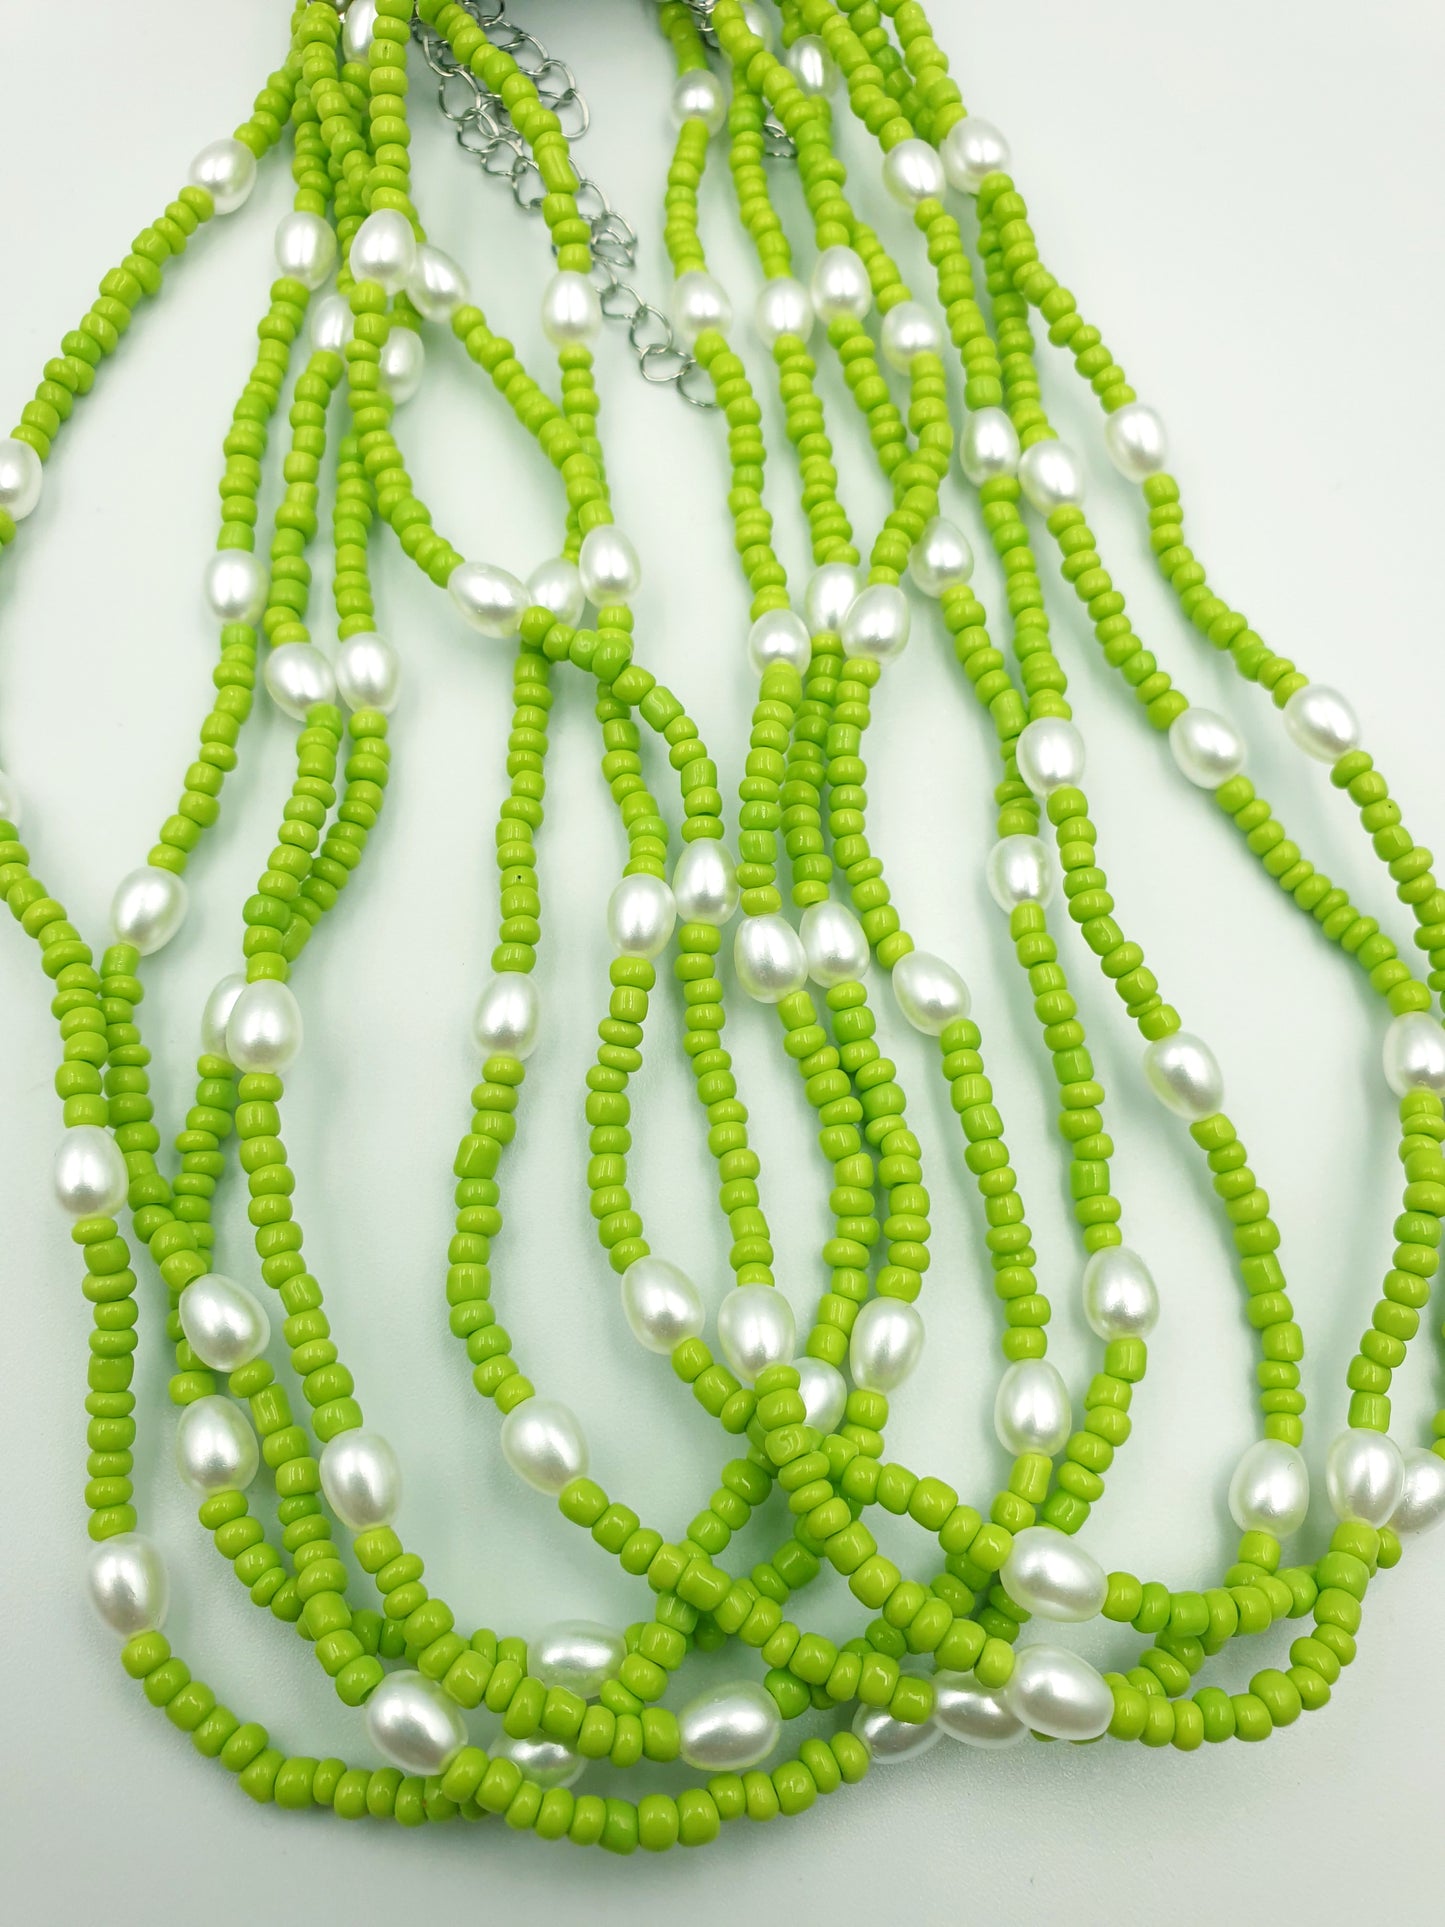 green beads Pearls, pearl beads, Beaded necklace, beads, beaded necklace, girls jewellery, ladies necklace, choker necklace, unique gifts, popular, 90s vibes, boho, bohemian jewellery